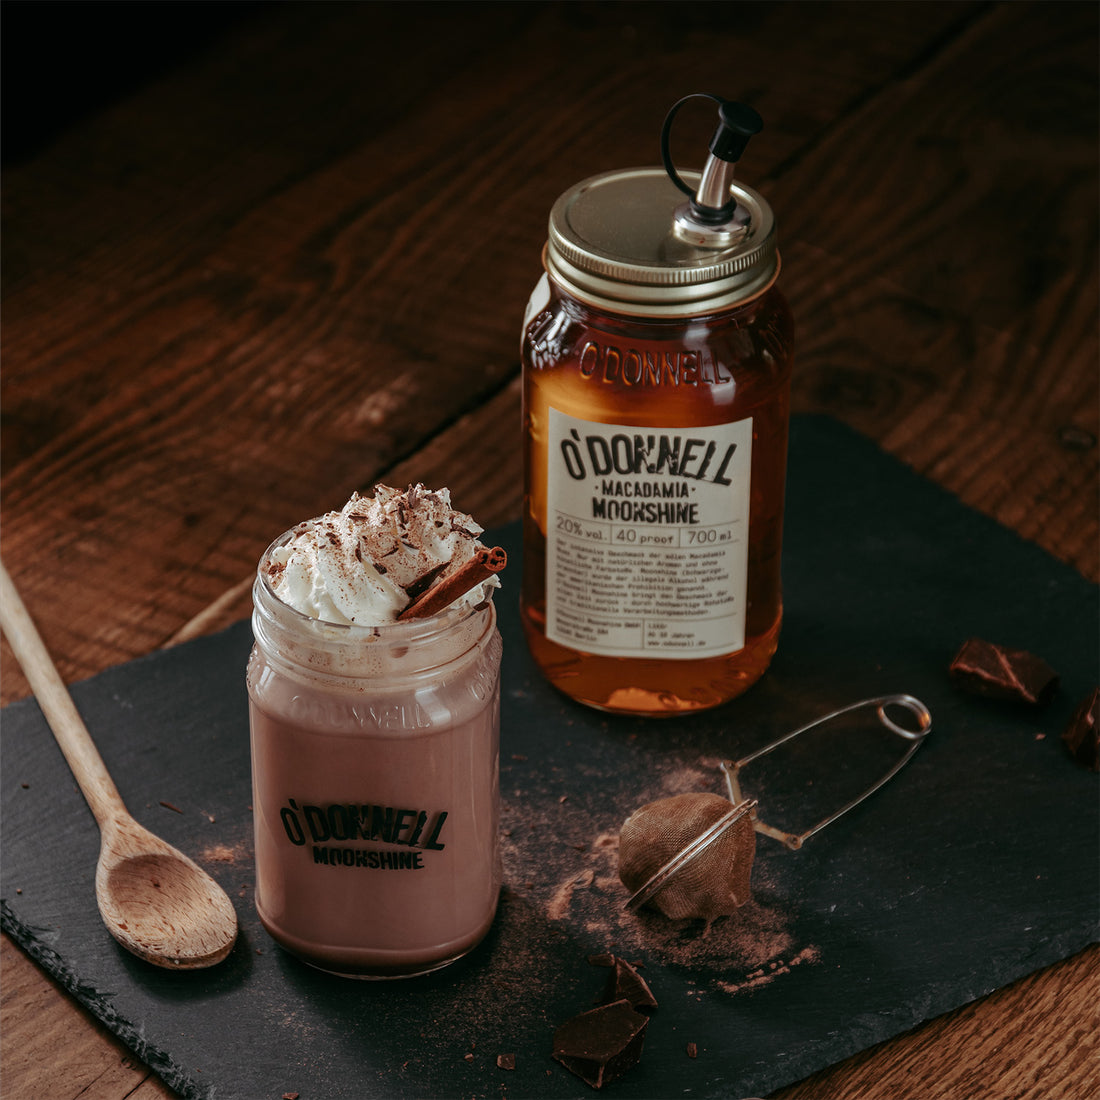 O Donnell Moonshine Adult Hot Chocolate